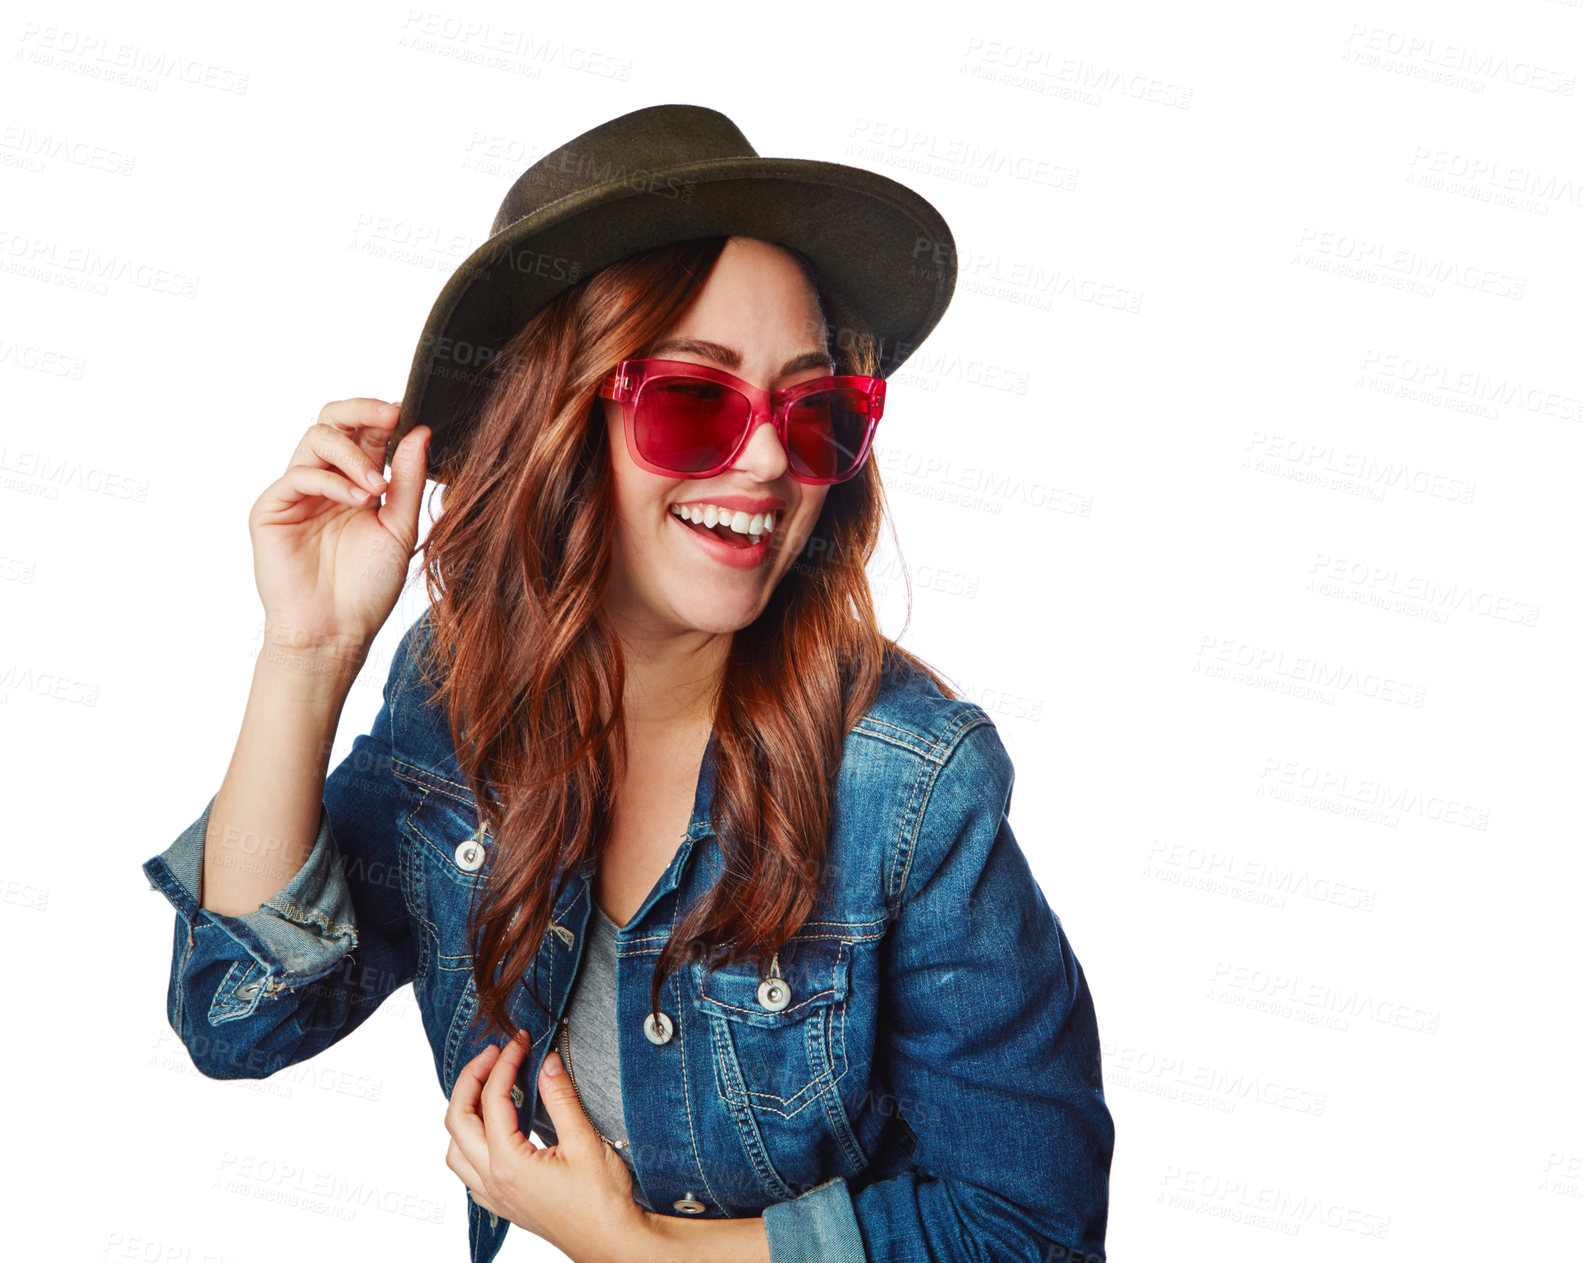 Buy stock photo Happy, young and woman in gen z fashion with trendy sunglasses and excited smile of people for style campaign. Happiness, cool and fashionista person smiling on isolated white background in studio.

